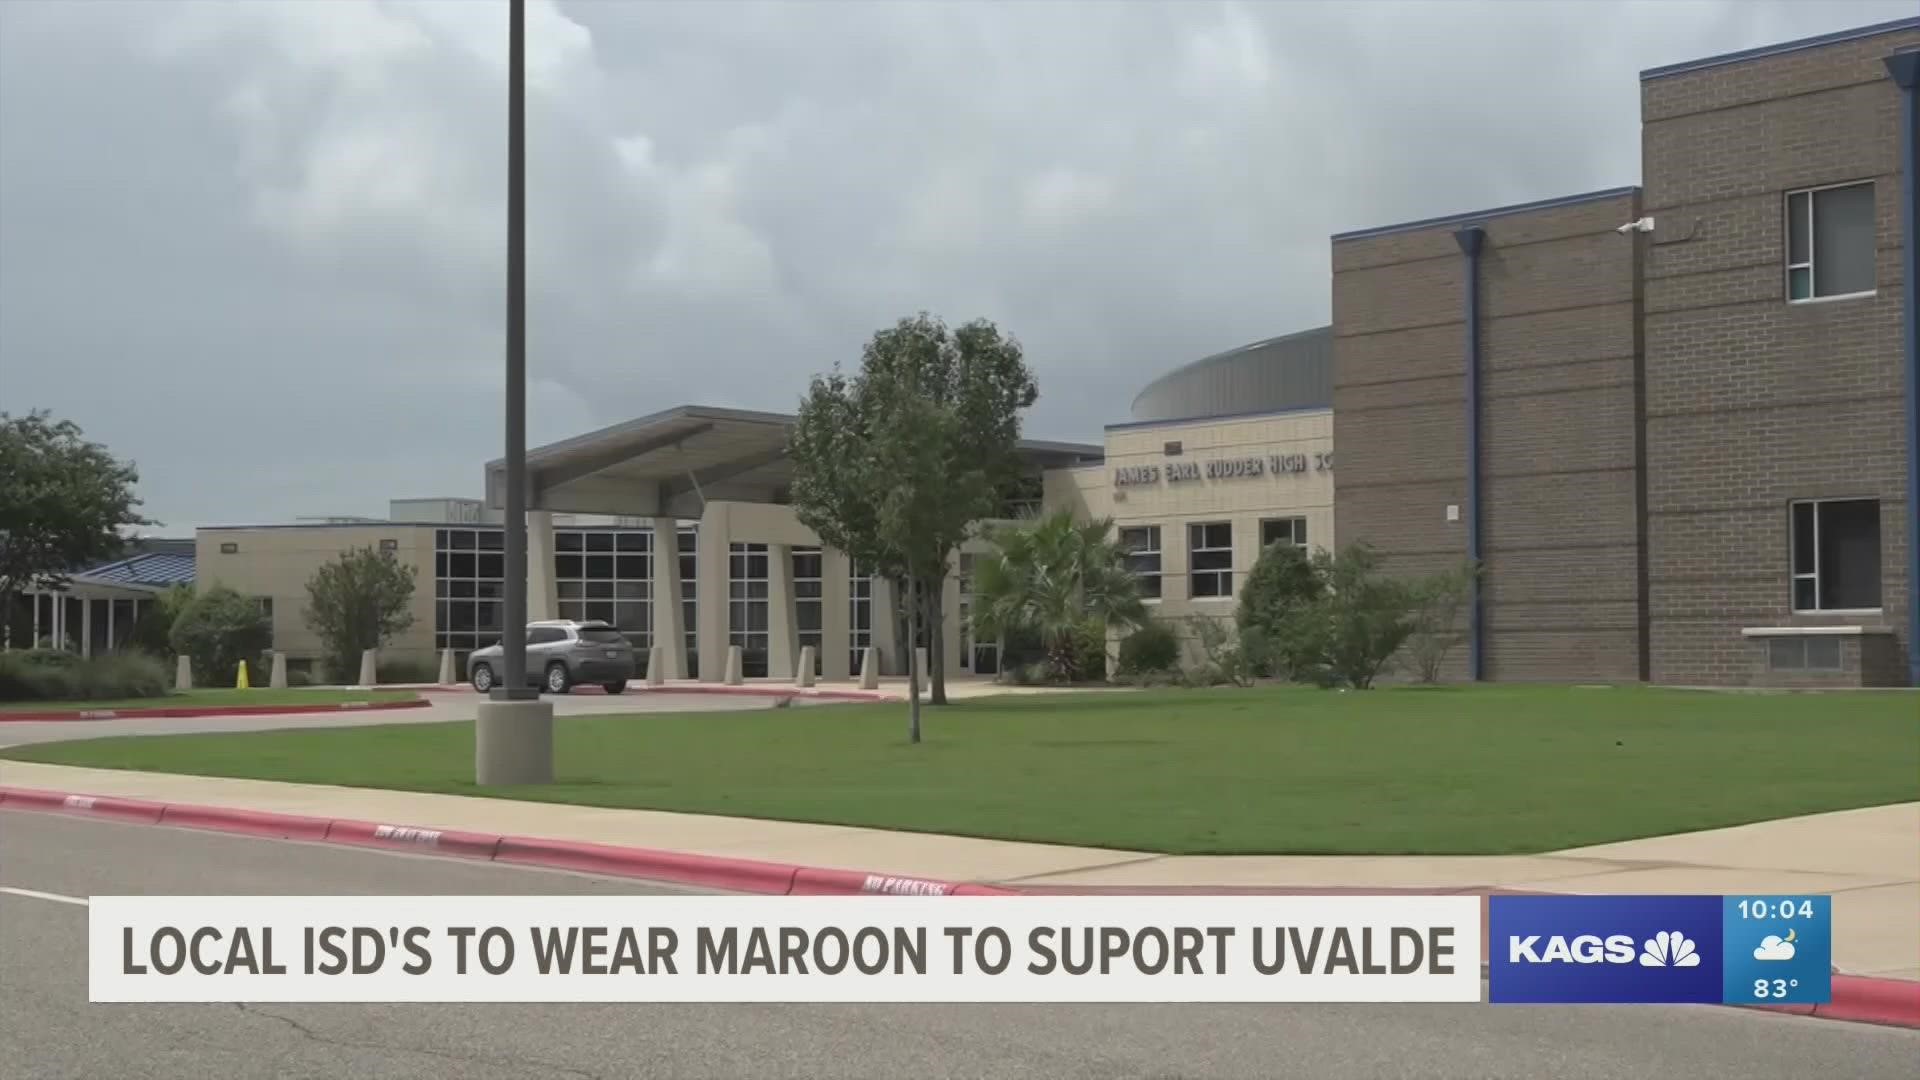 Other school districts around the state are calling on their students to wear maroon Tuesday to show support for Uvalde.